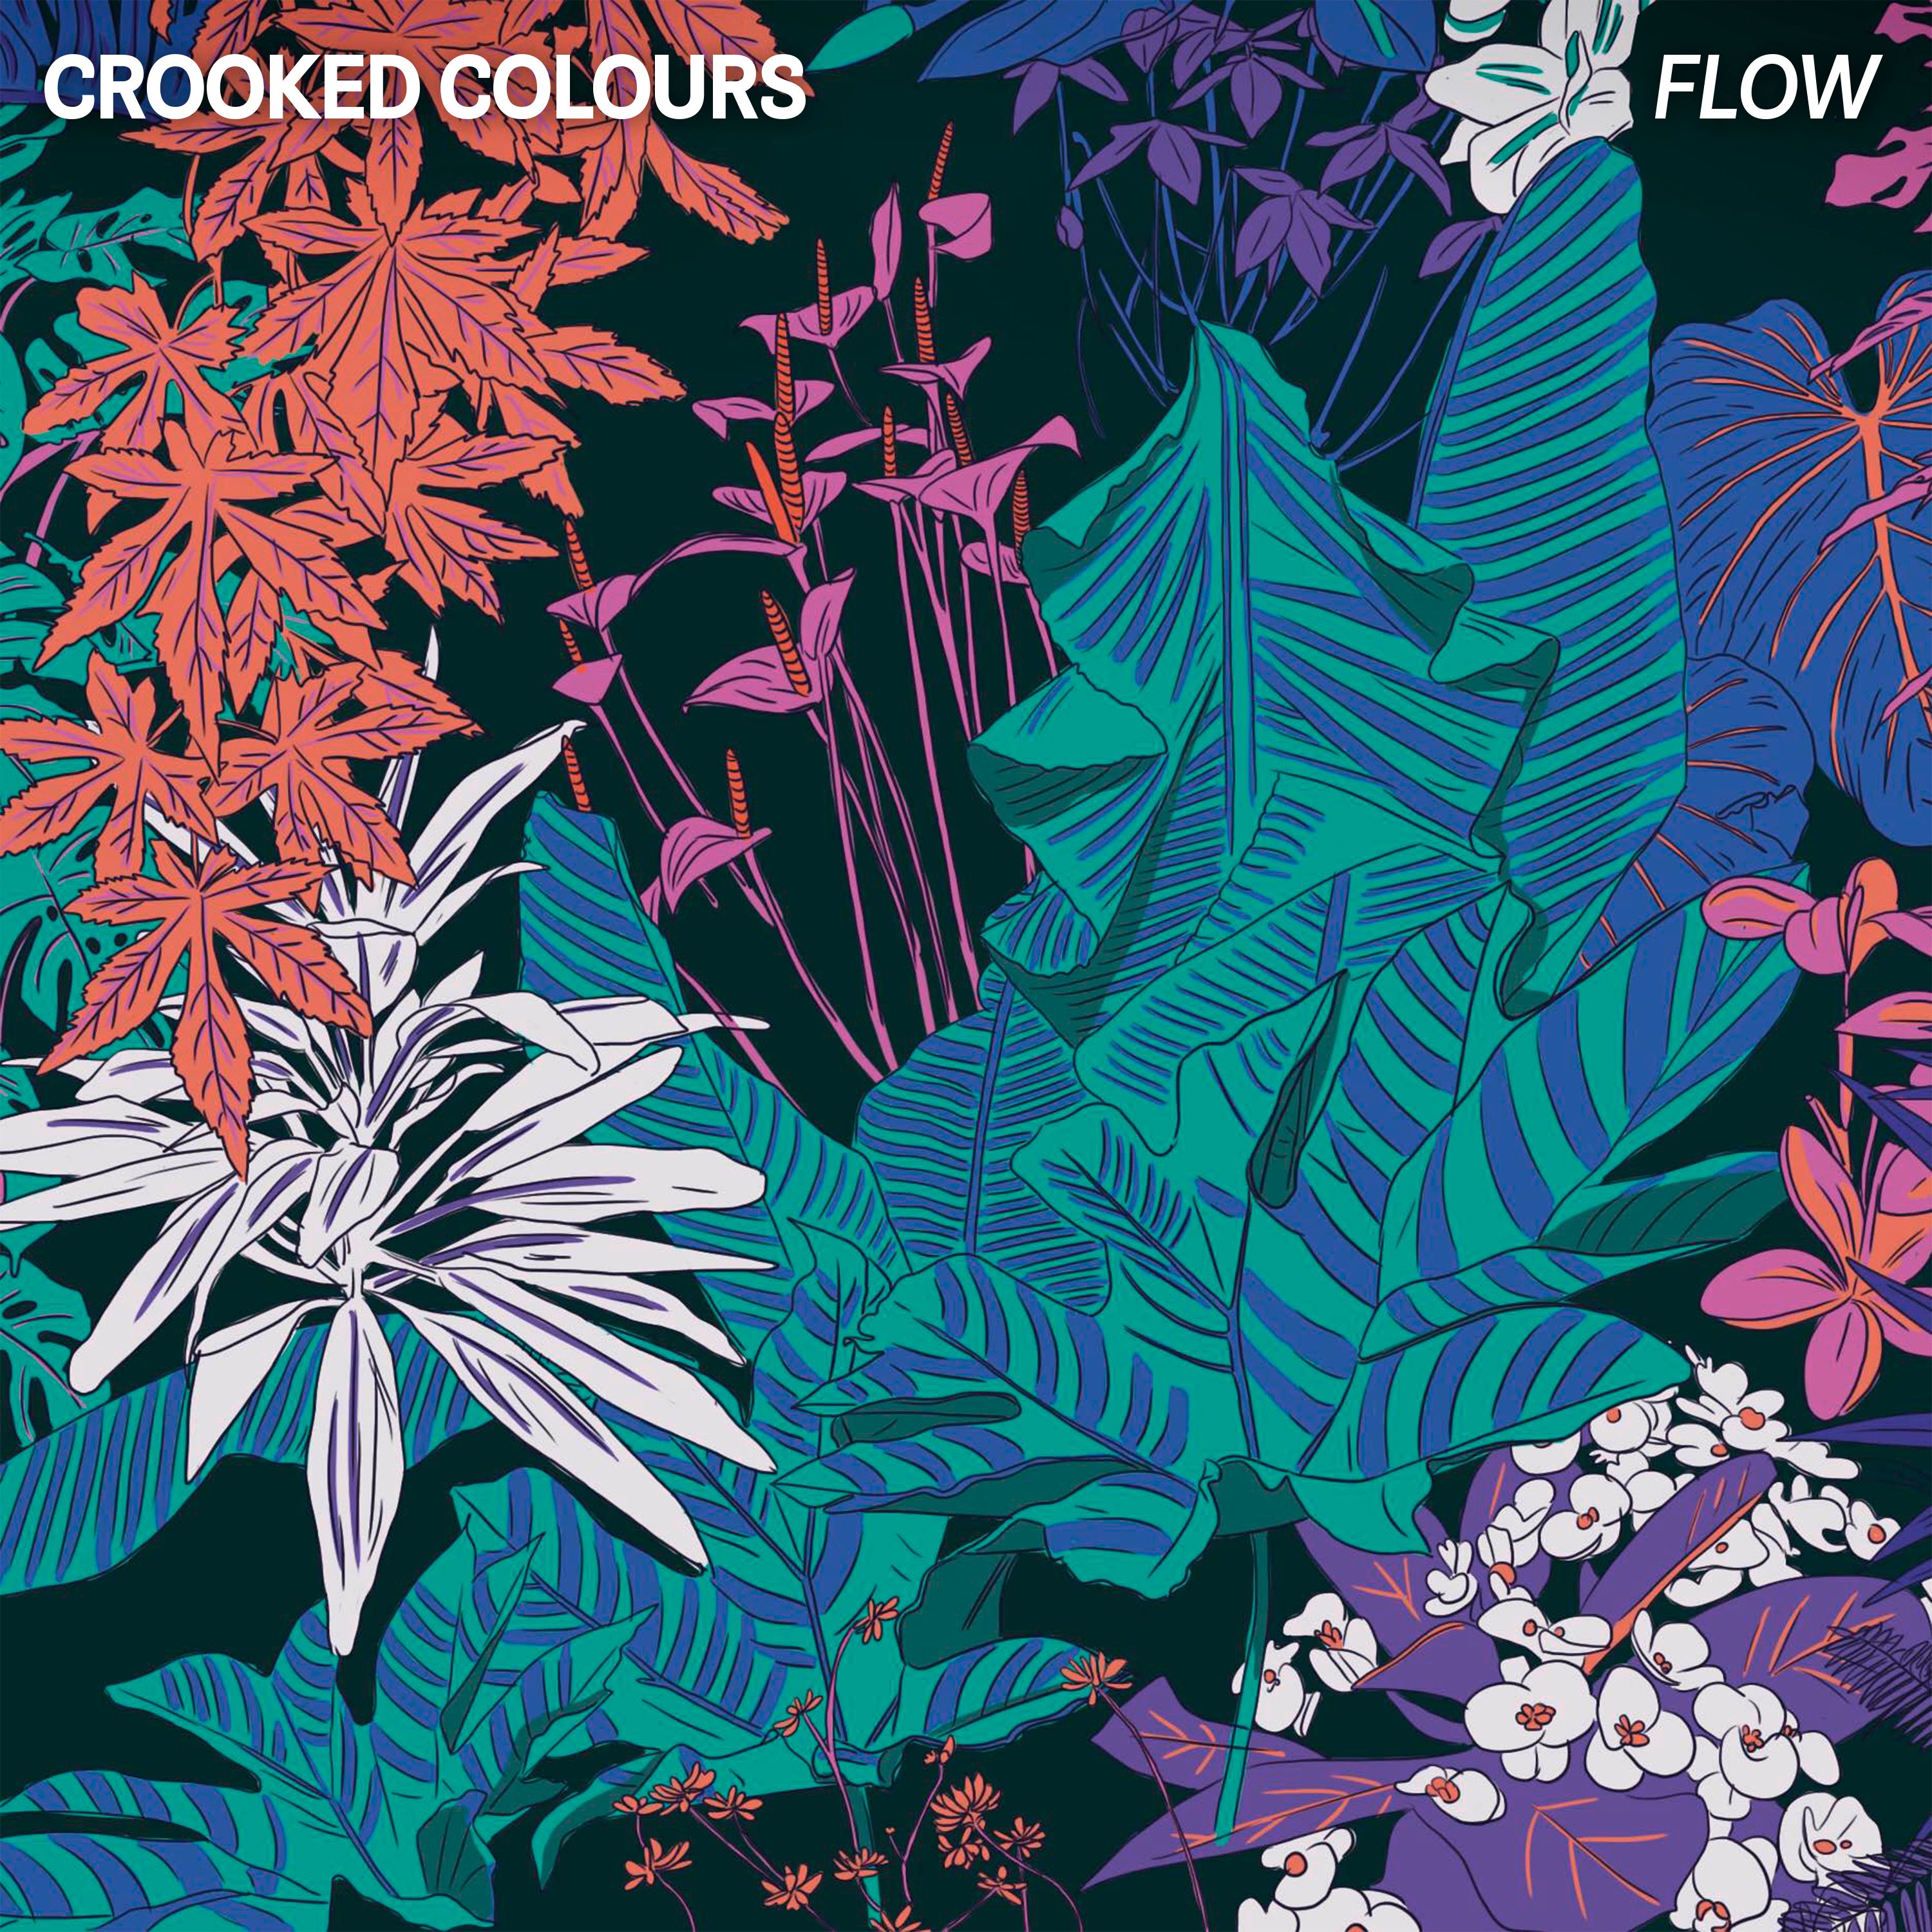 Crooked Colours – “Flow”